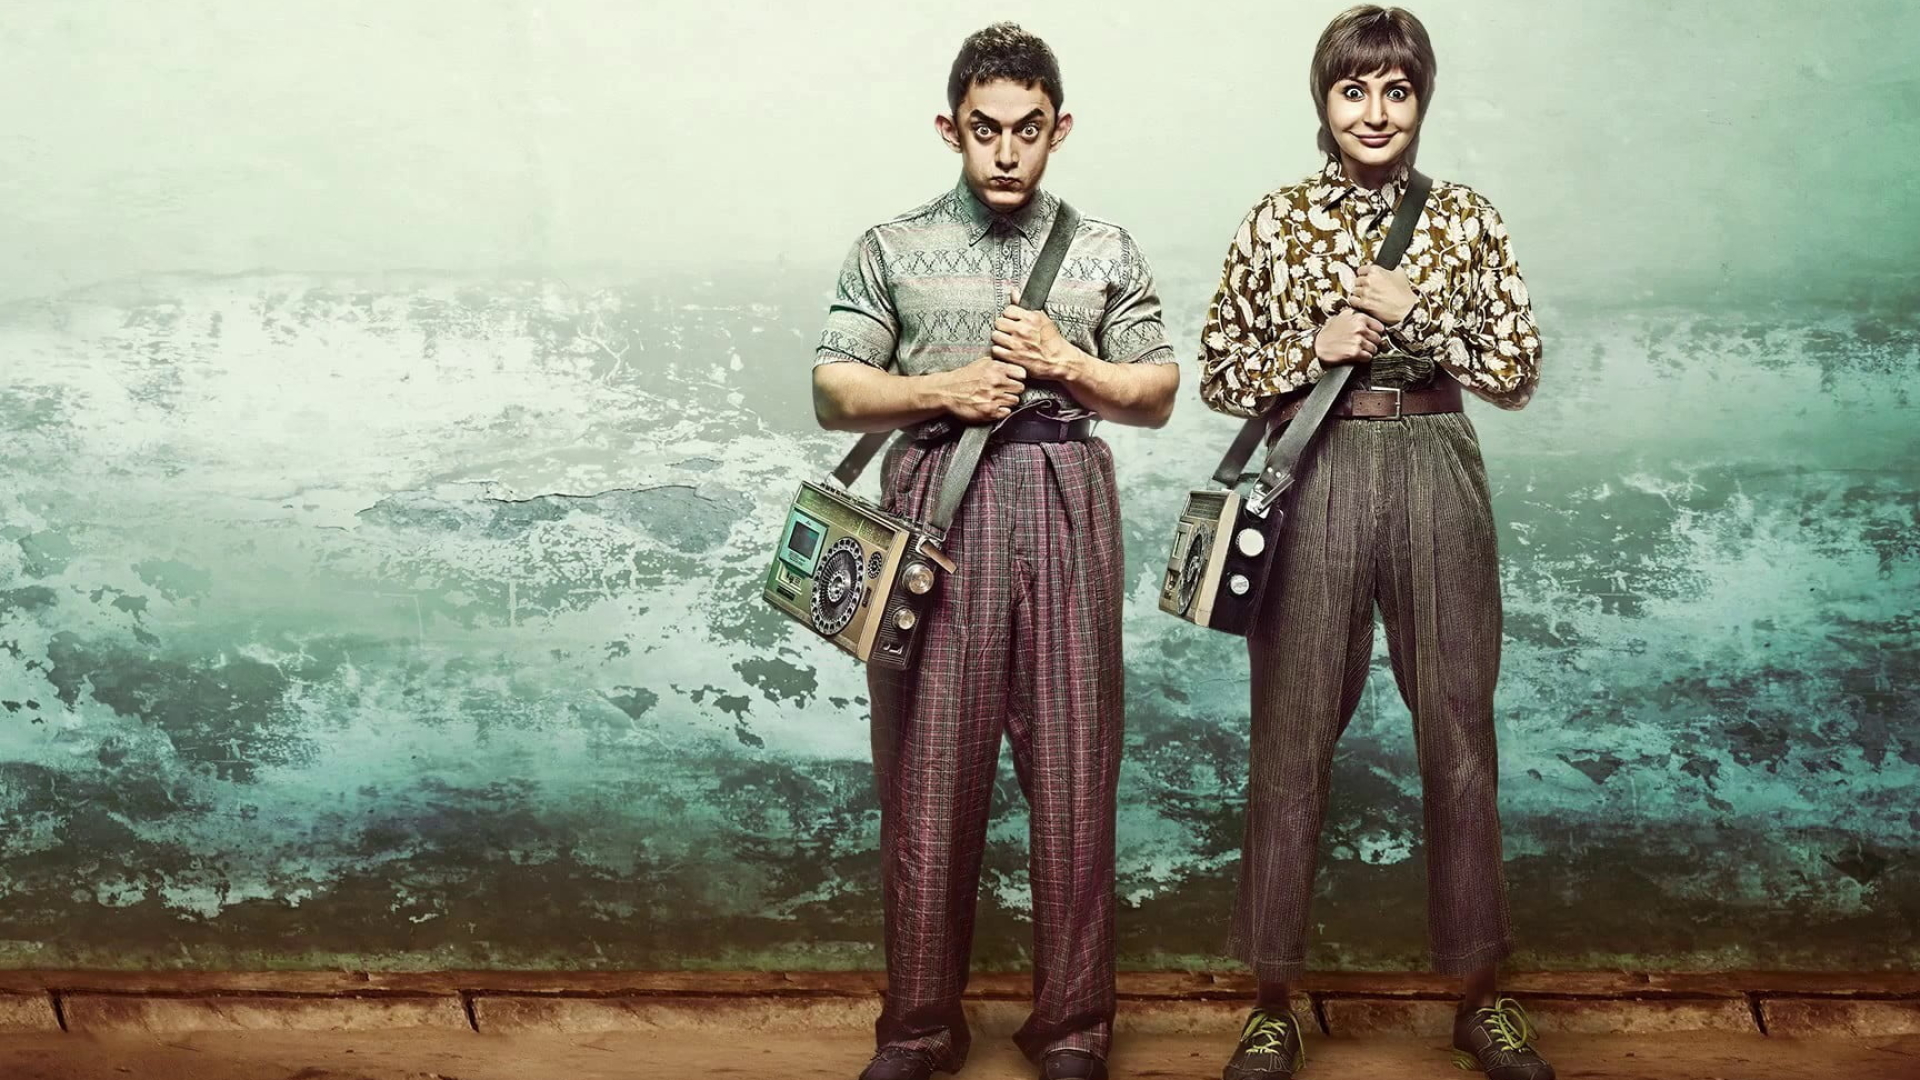 PK (Movie): The 8th highest-grossing Indian film of all time and 9th highest-grossing film in India. 1920x1080 Full HD Background.